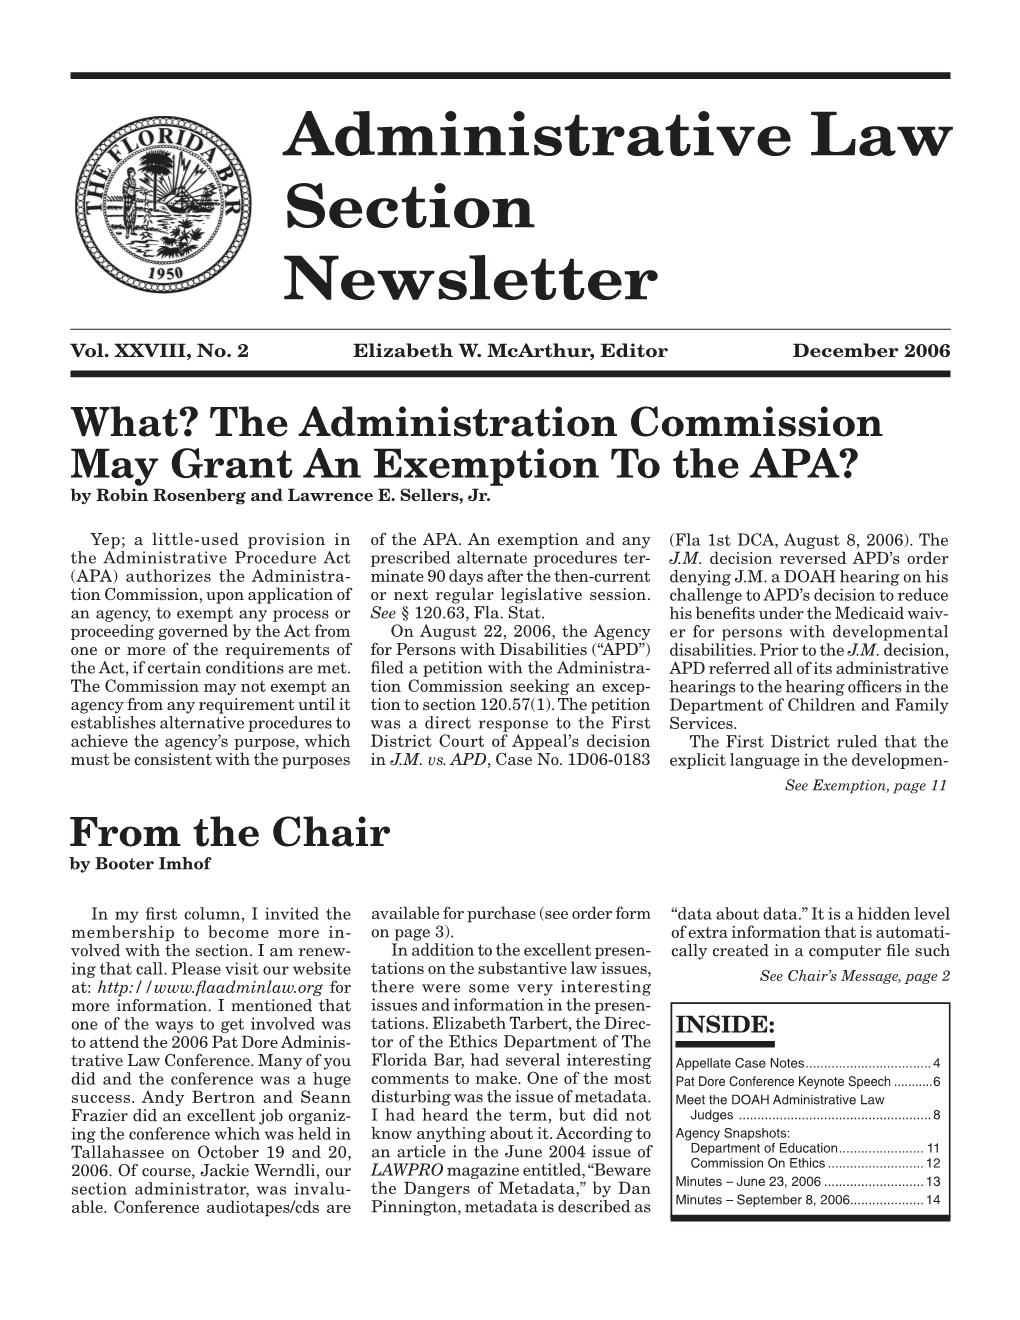 Administrative Law Section Newsletter